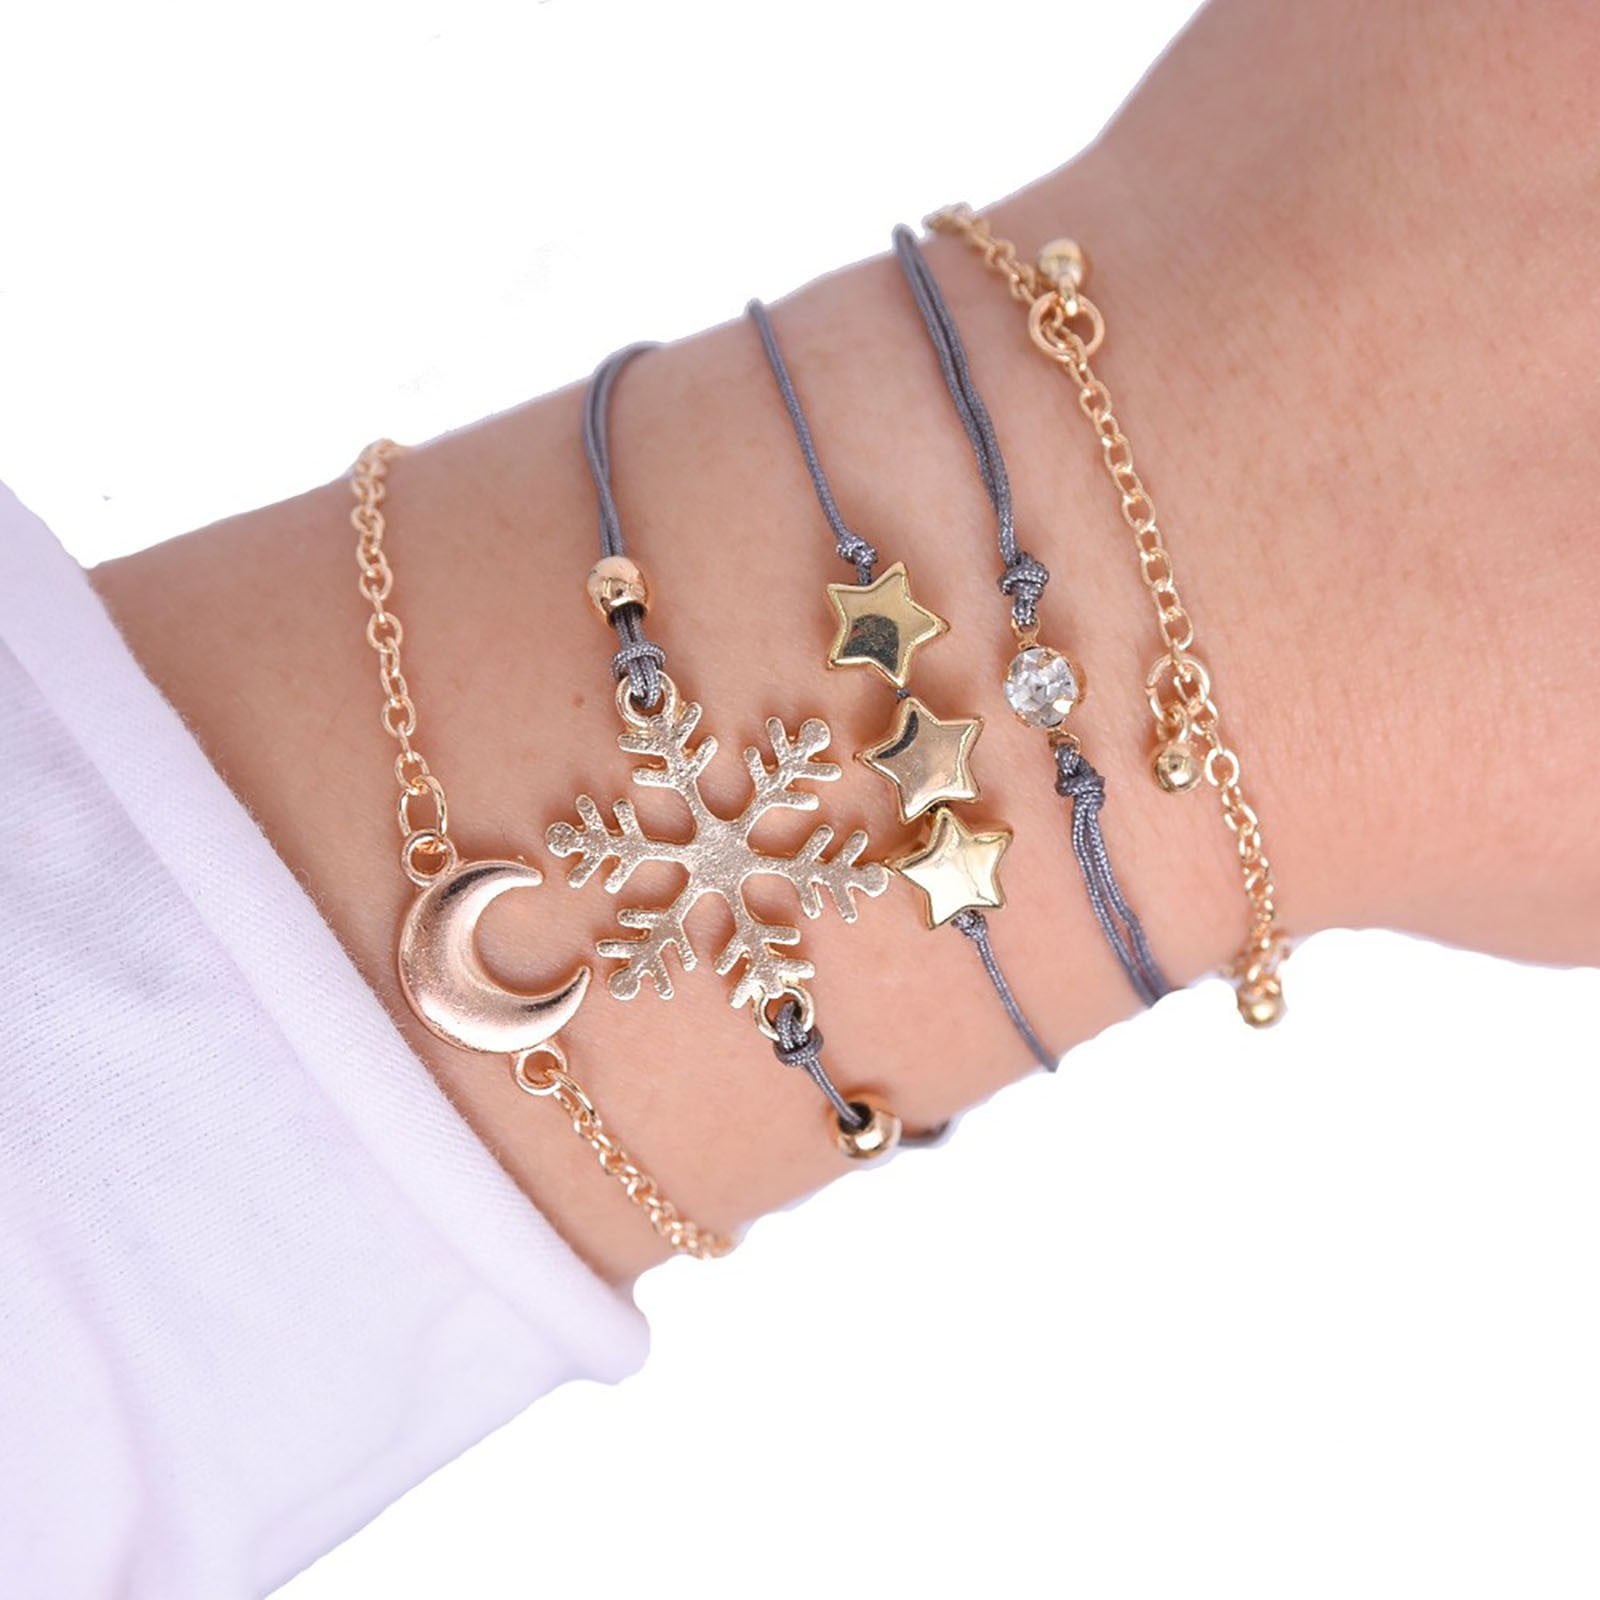 Simple Silver Alloy Party Wear Bracelet For Girls And Women - Silver Shine  - 3207470